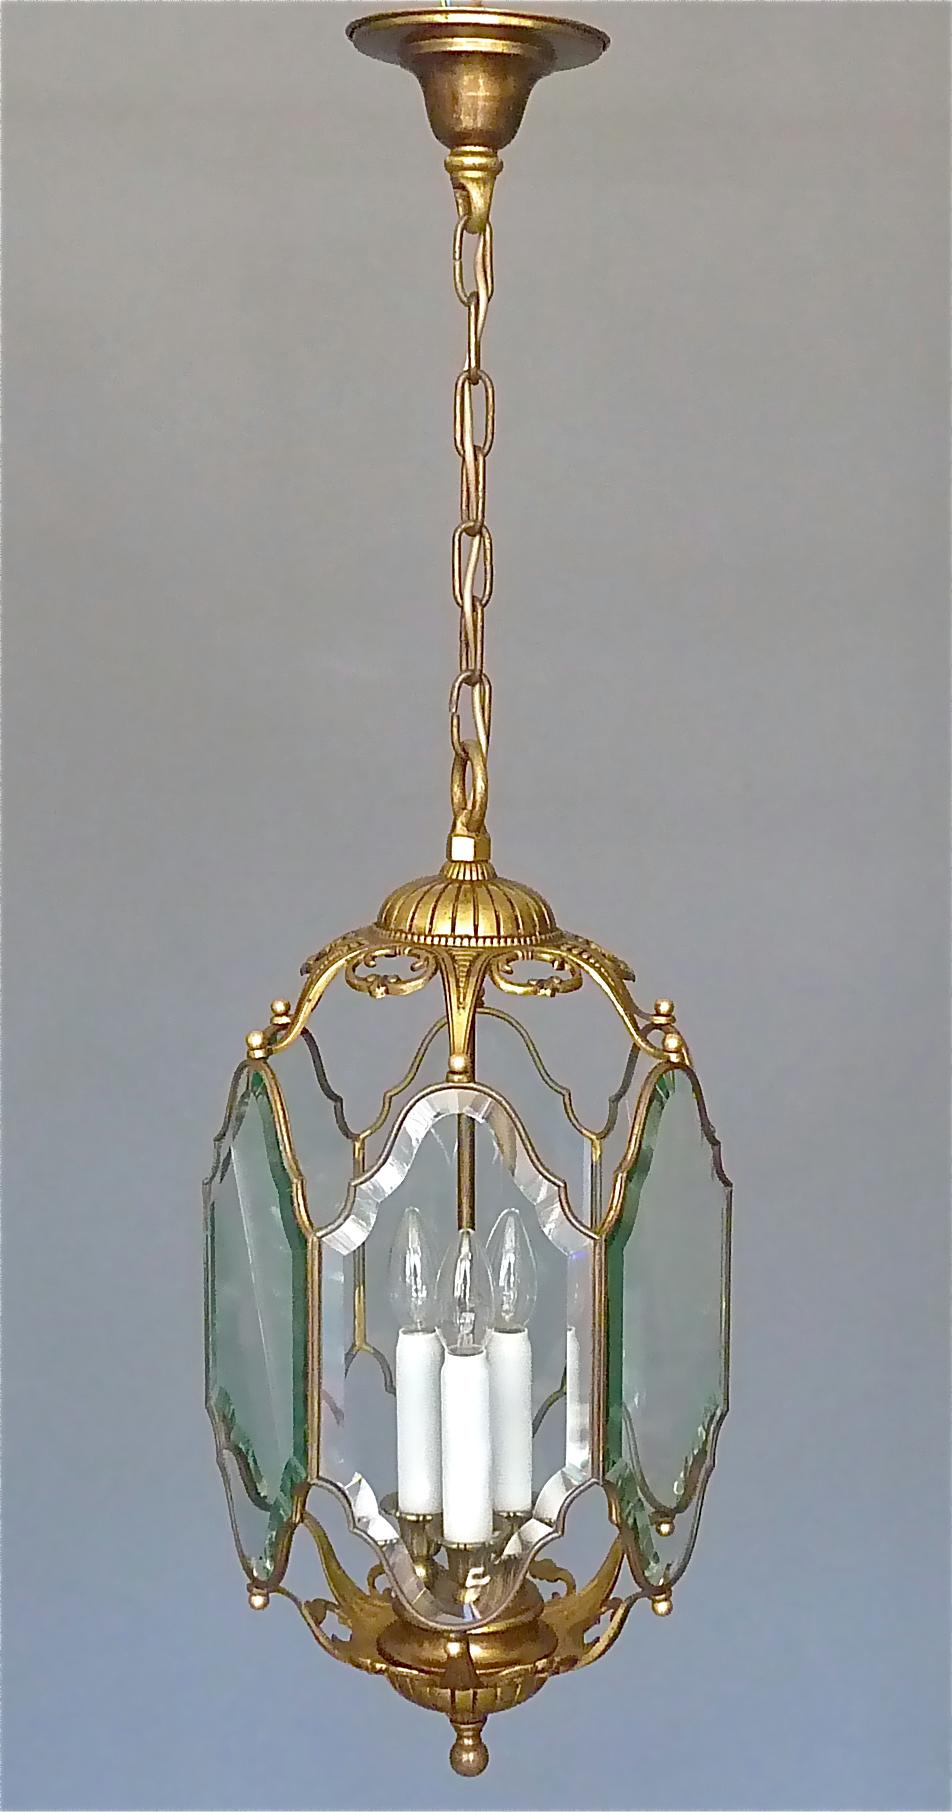 Large antique french lantern or pendant lamp, France circa 1880 to 1920. Made of patinated brass and bronze metal the six-sided light corpus has hand-cut faceted and beveled crystal glass sections, the center with three lights and three rare white